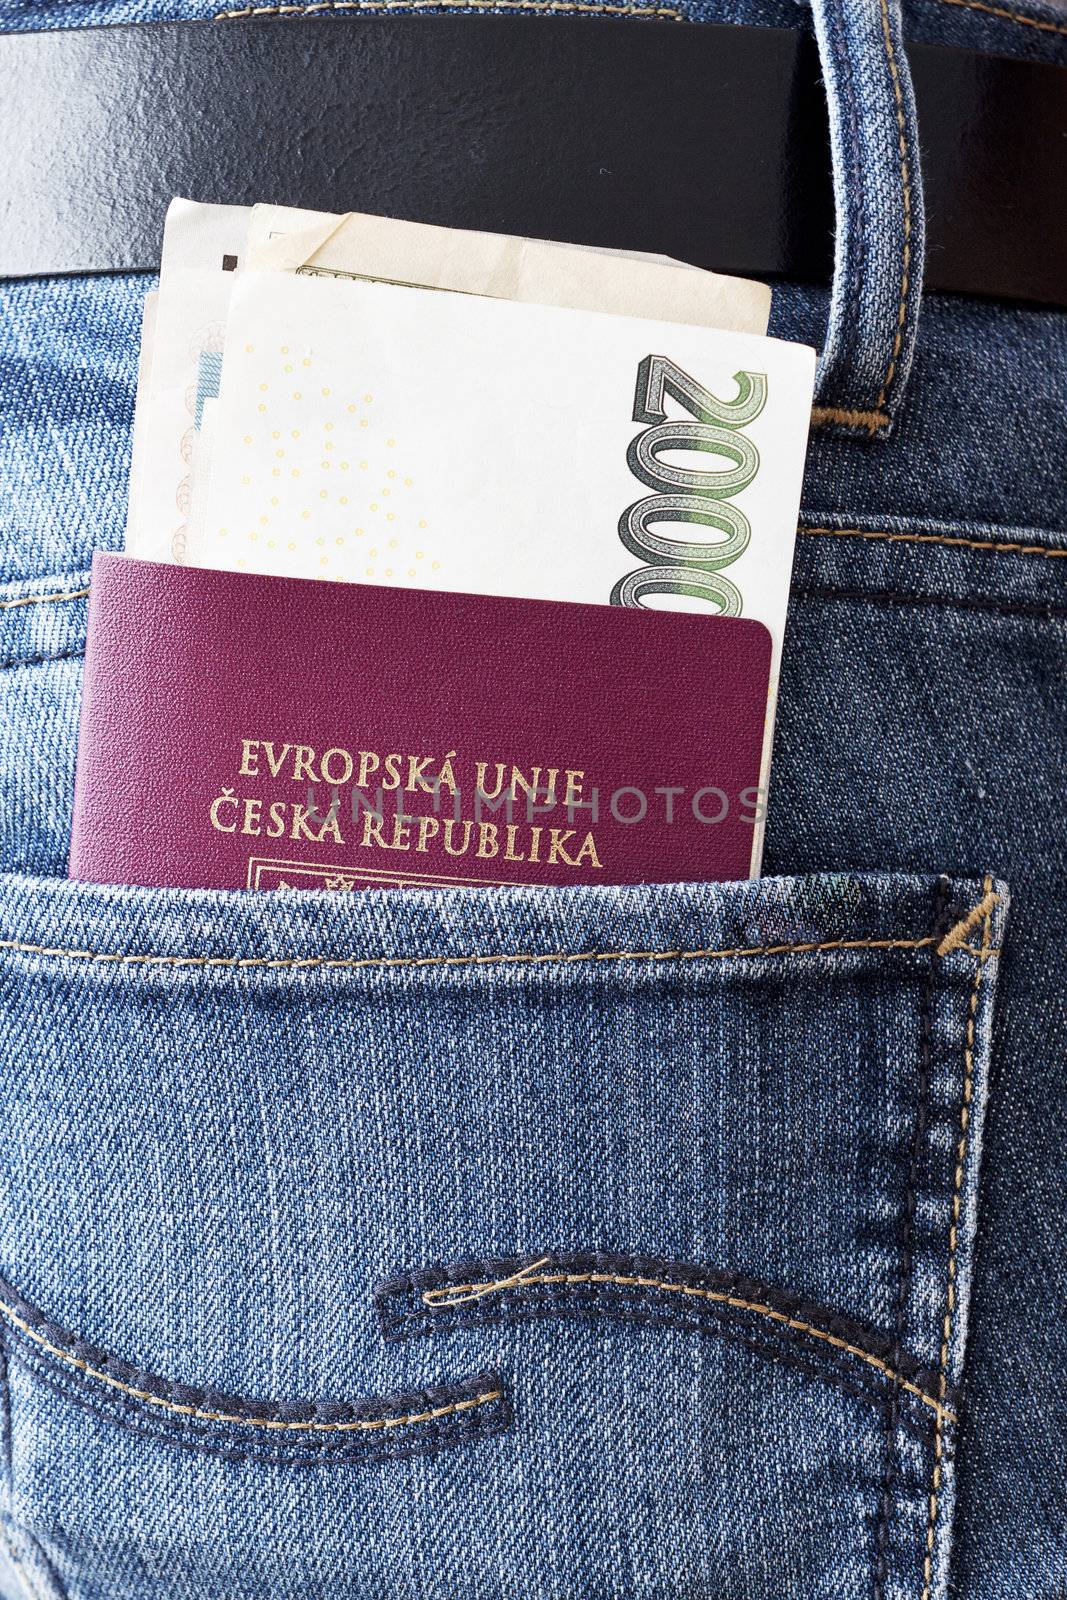 Czech passport and banknotes in the back pocket. by michalpecek